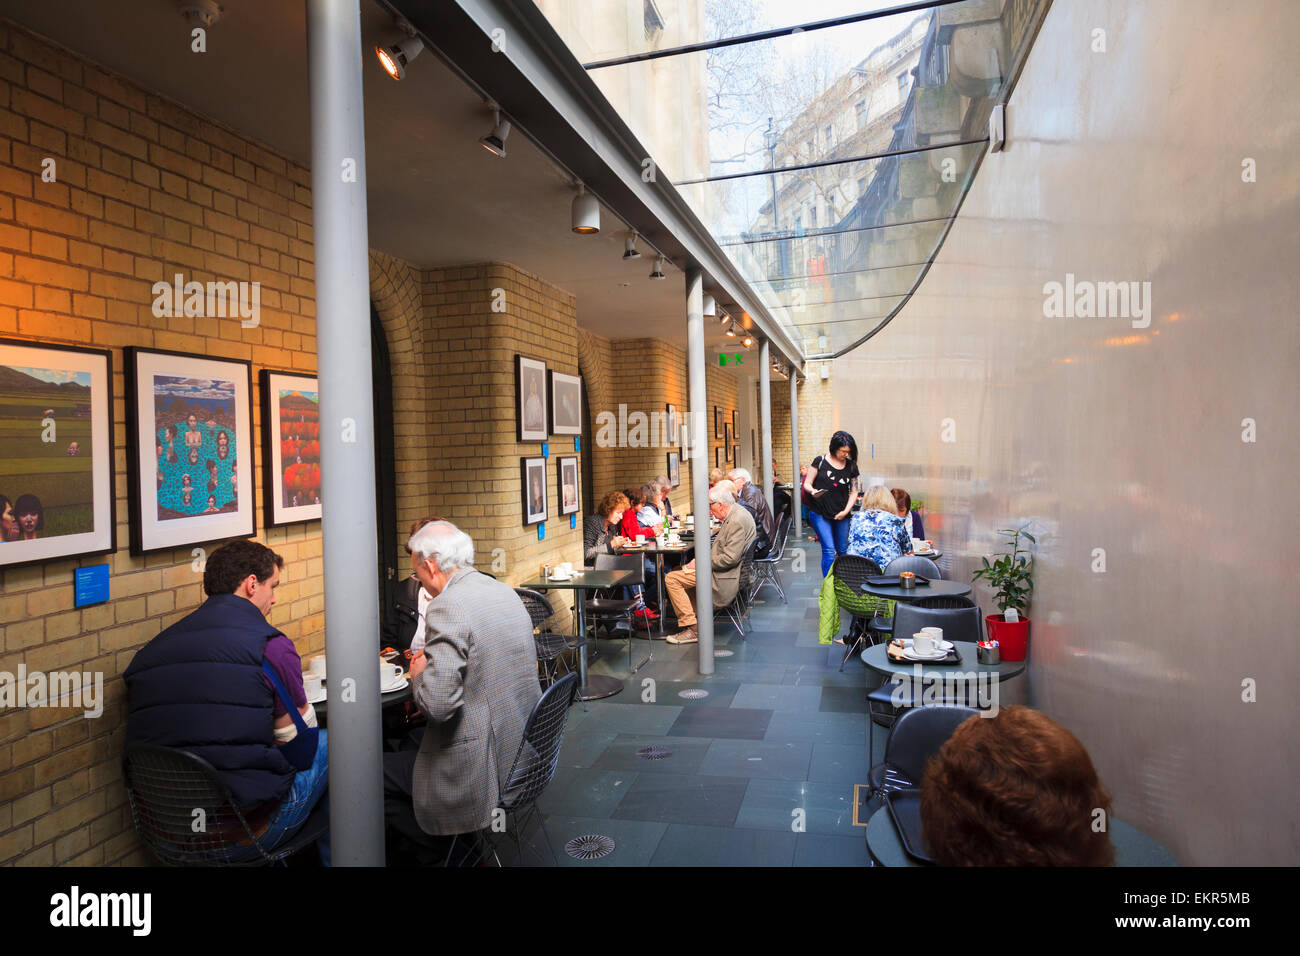 The semi-basement cafe at the National portrait gallery Stock Photo